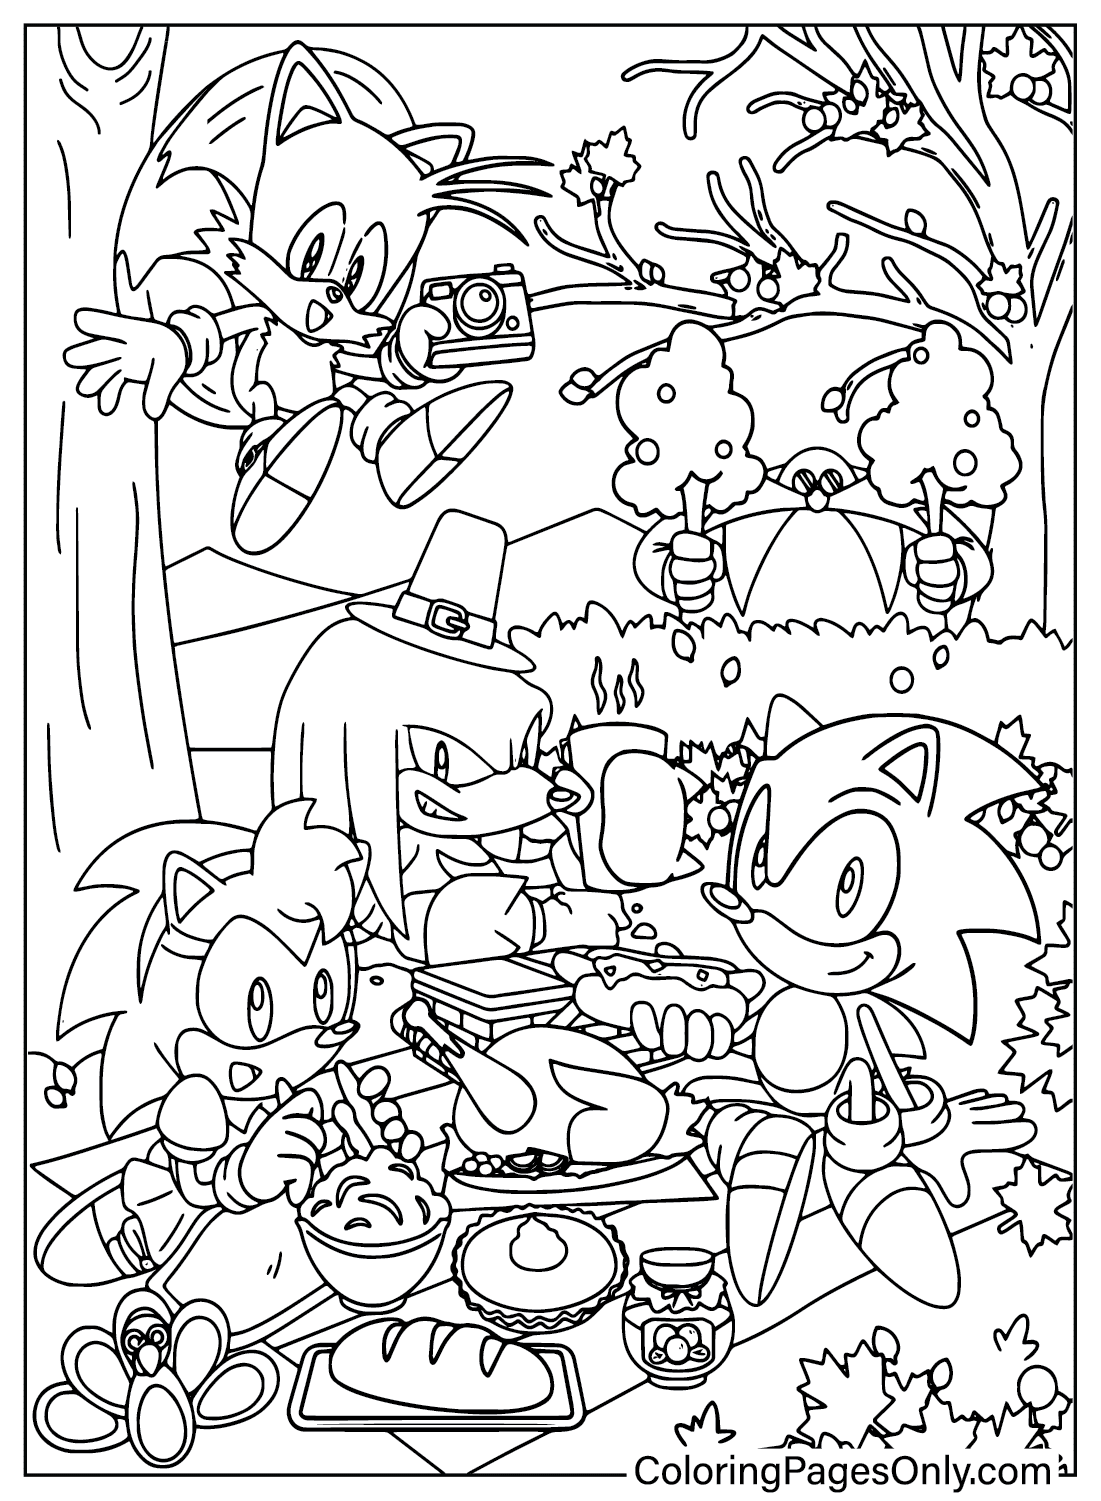 Thanksgiving Sonic Coloring Page from Thanksgiving Cartoon